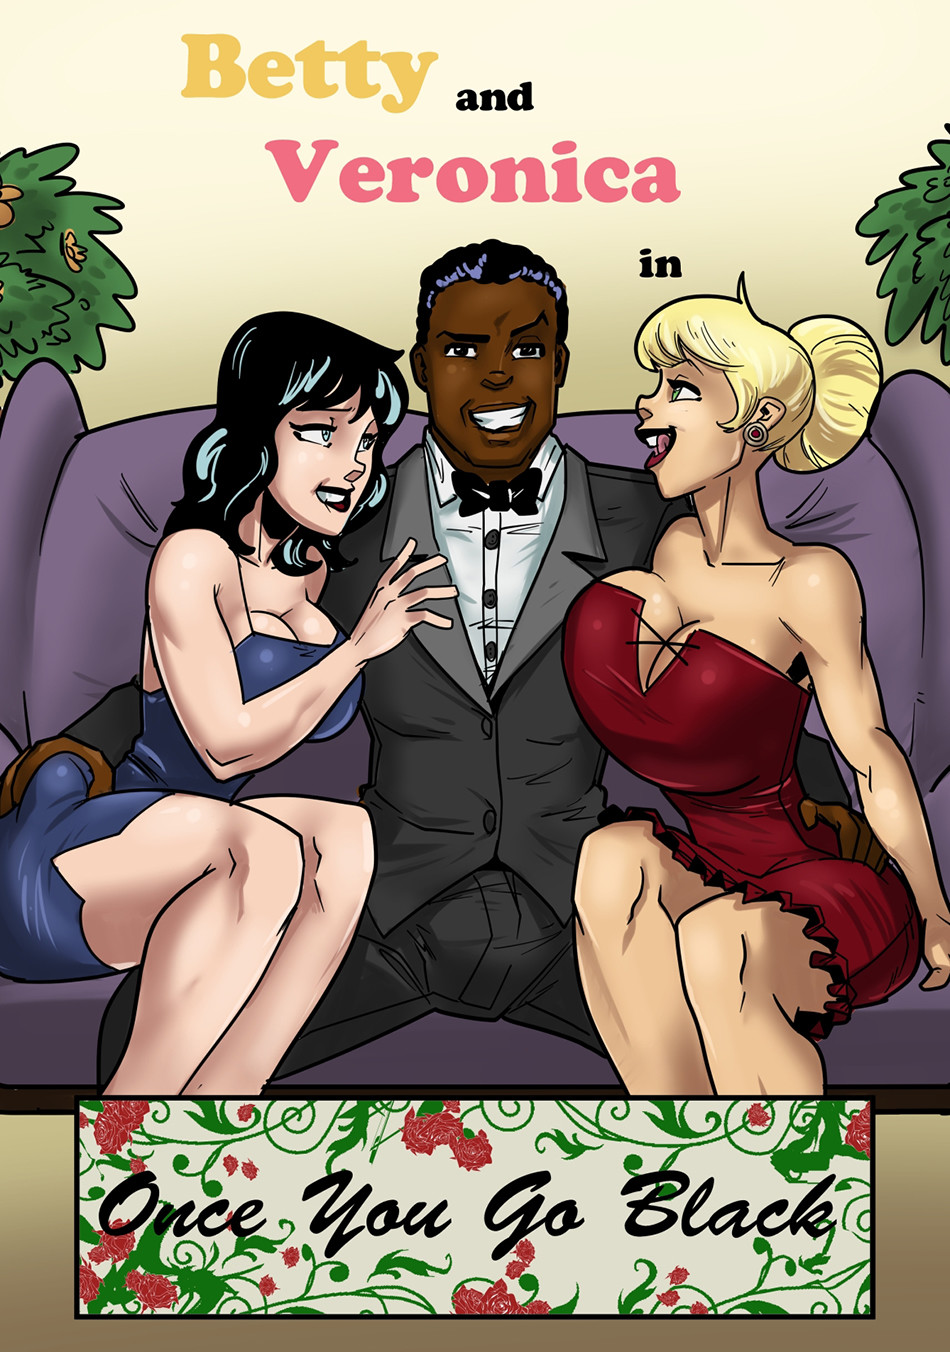 John Persons Xxx Toons - XXX - Betty and Veronica love BBC- John Persons Porn Comic | HD Porn Comics